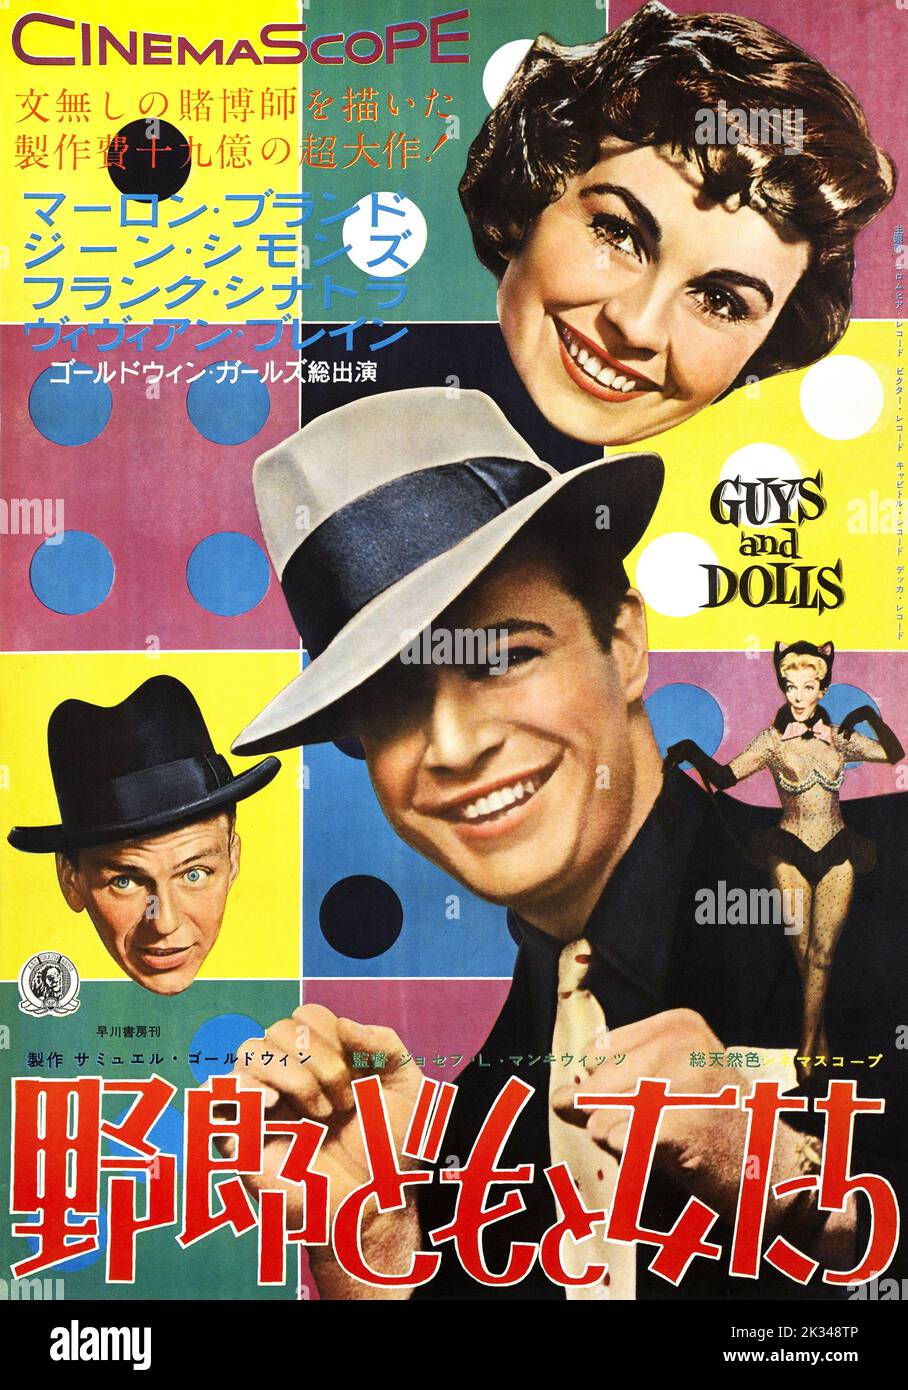 Vintage 1950s Japanese Film Poster - Guys and Dolls (1955) Stock Photo